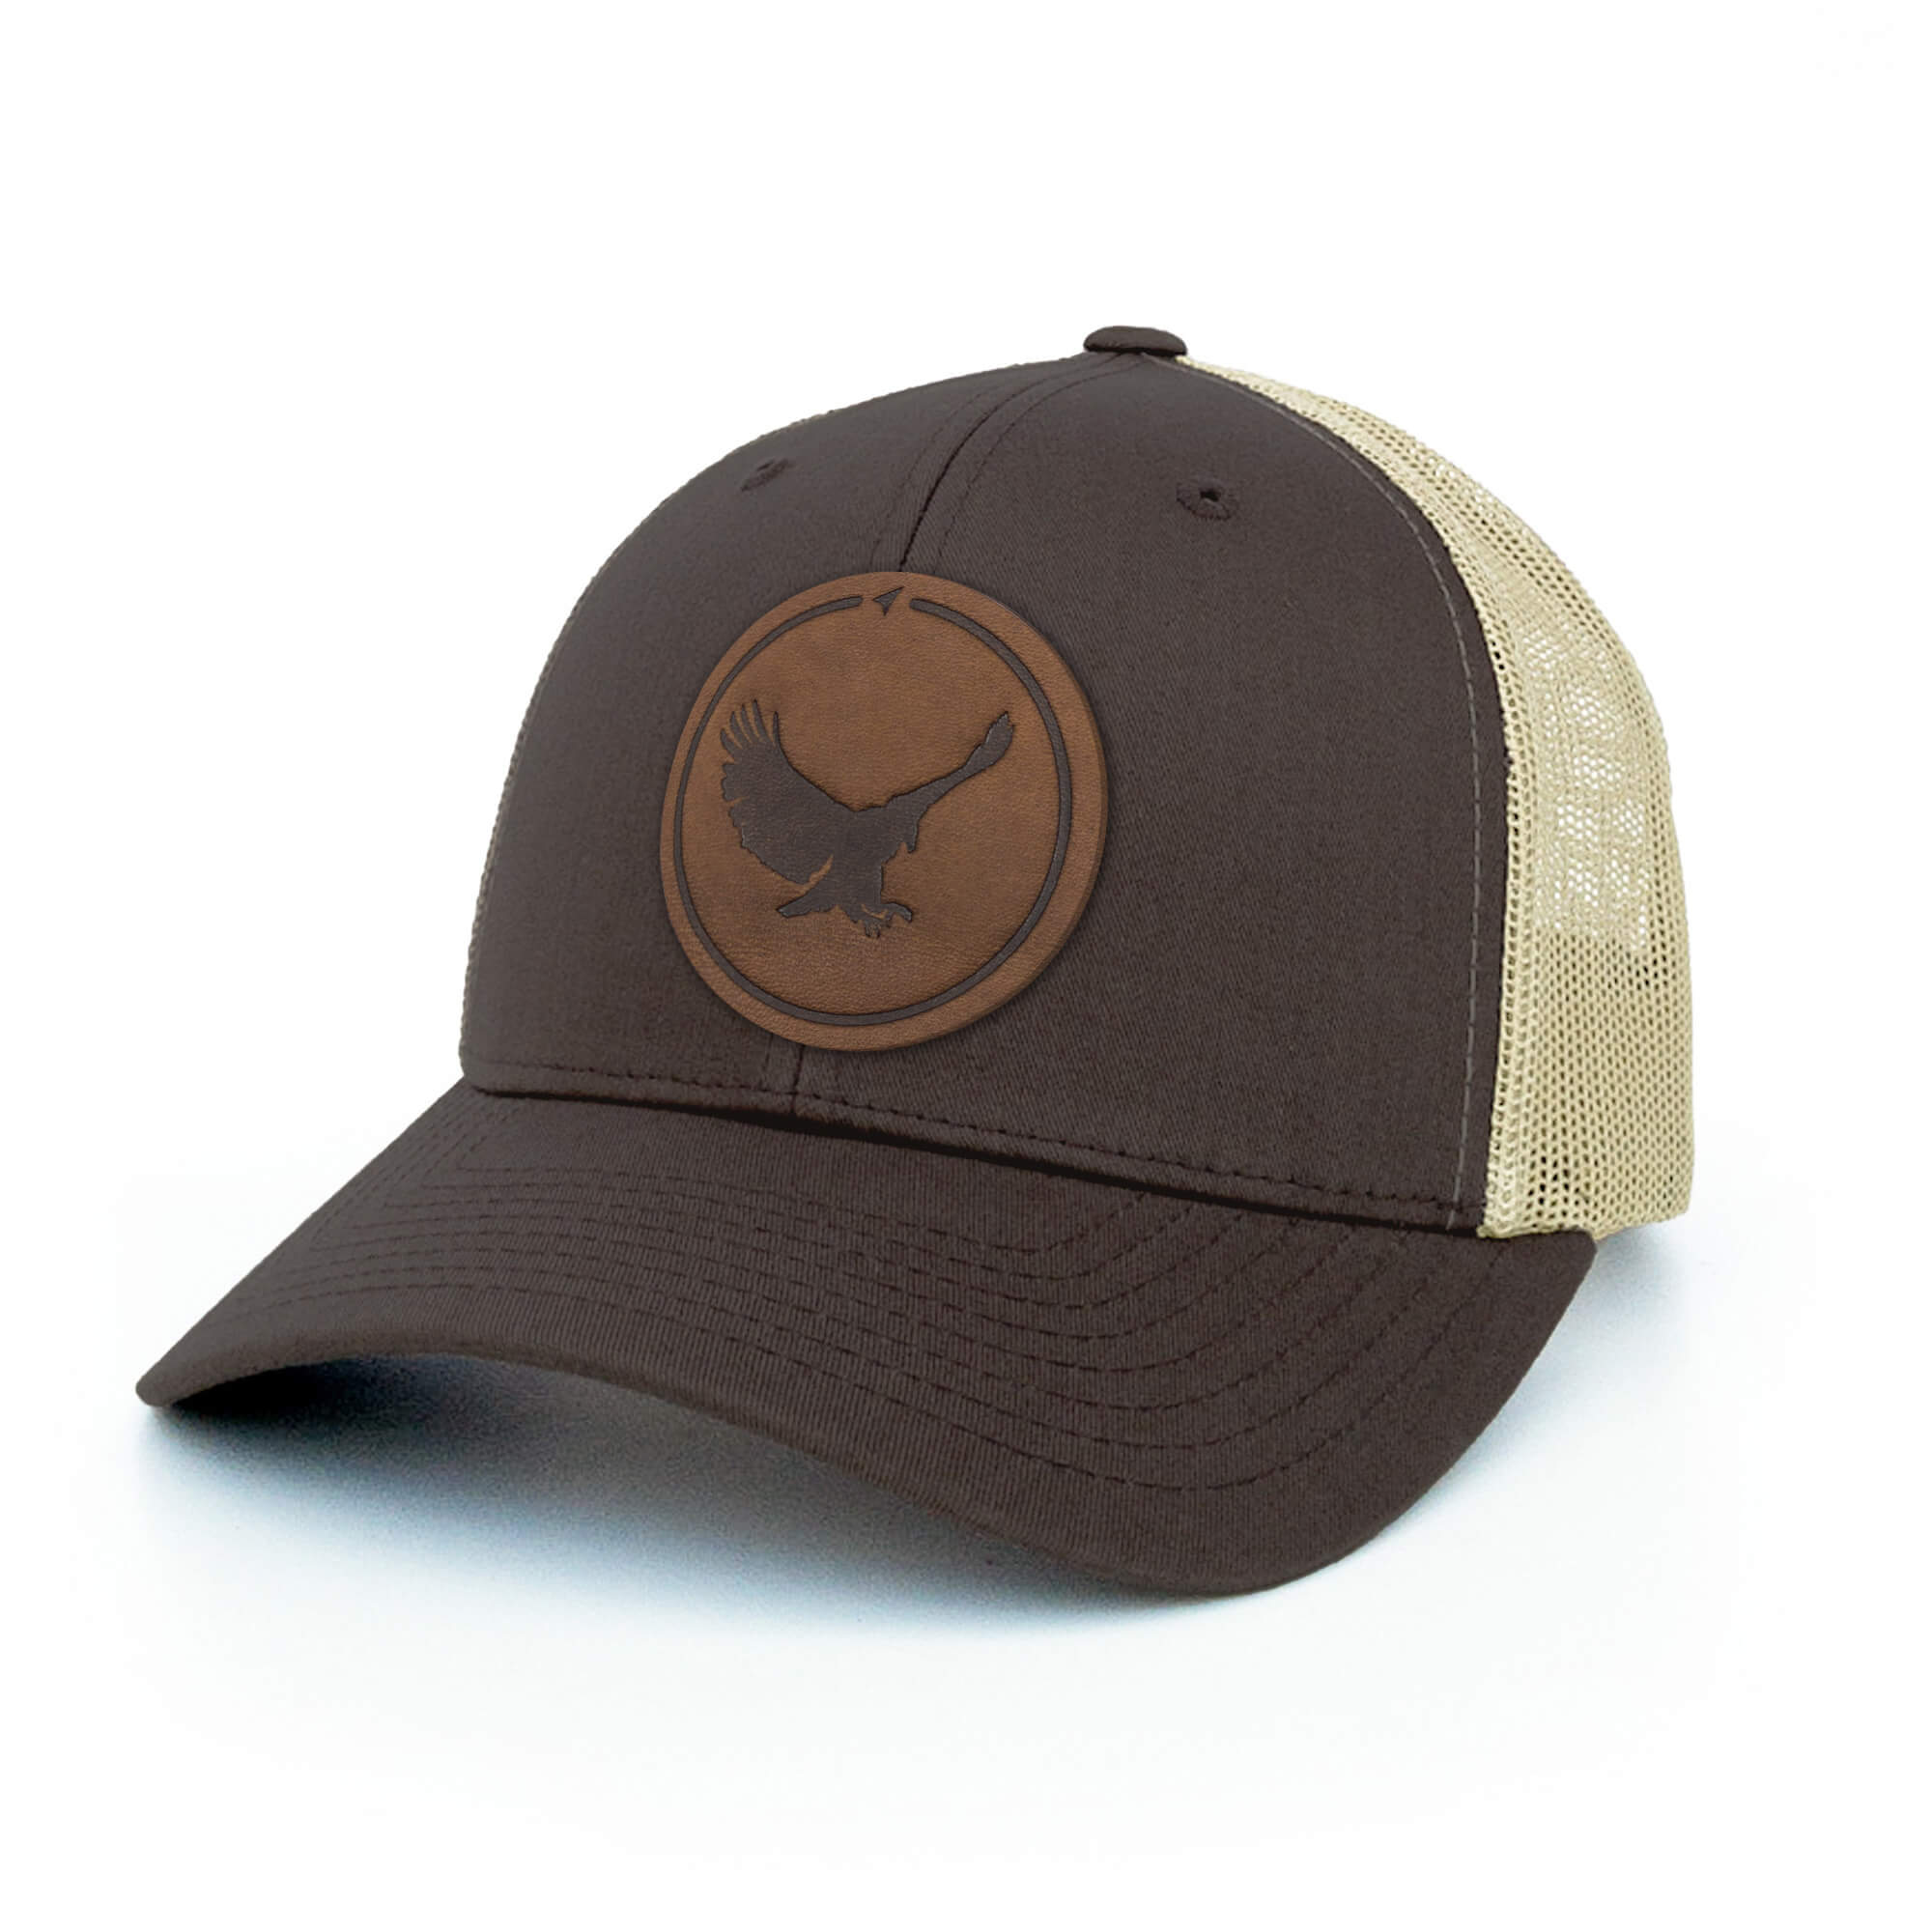 Brown and khaki trucker hat with full-grain leather patch of an Eagle | BLACK-004-004, CHARC-004-004, NAVY-004-004, HGREY-004-004, MOSS-004-004, BROWN-004-004